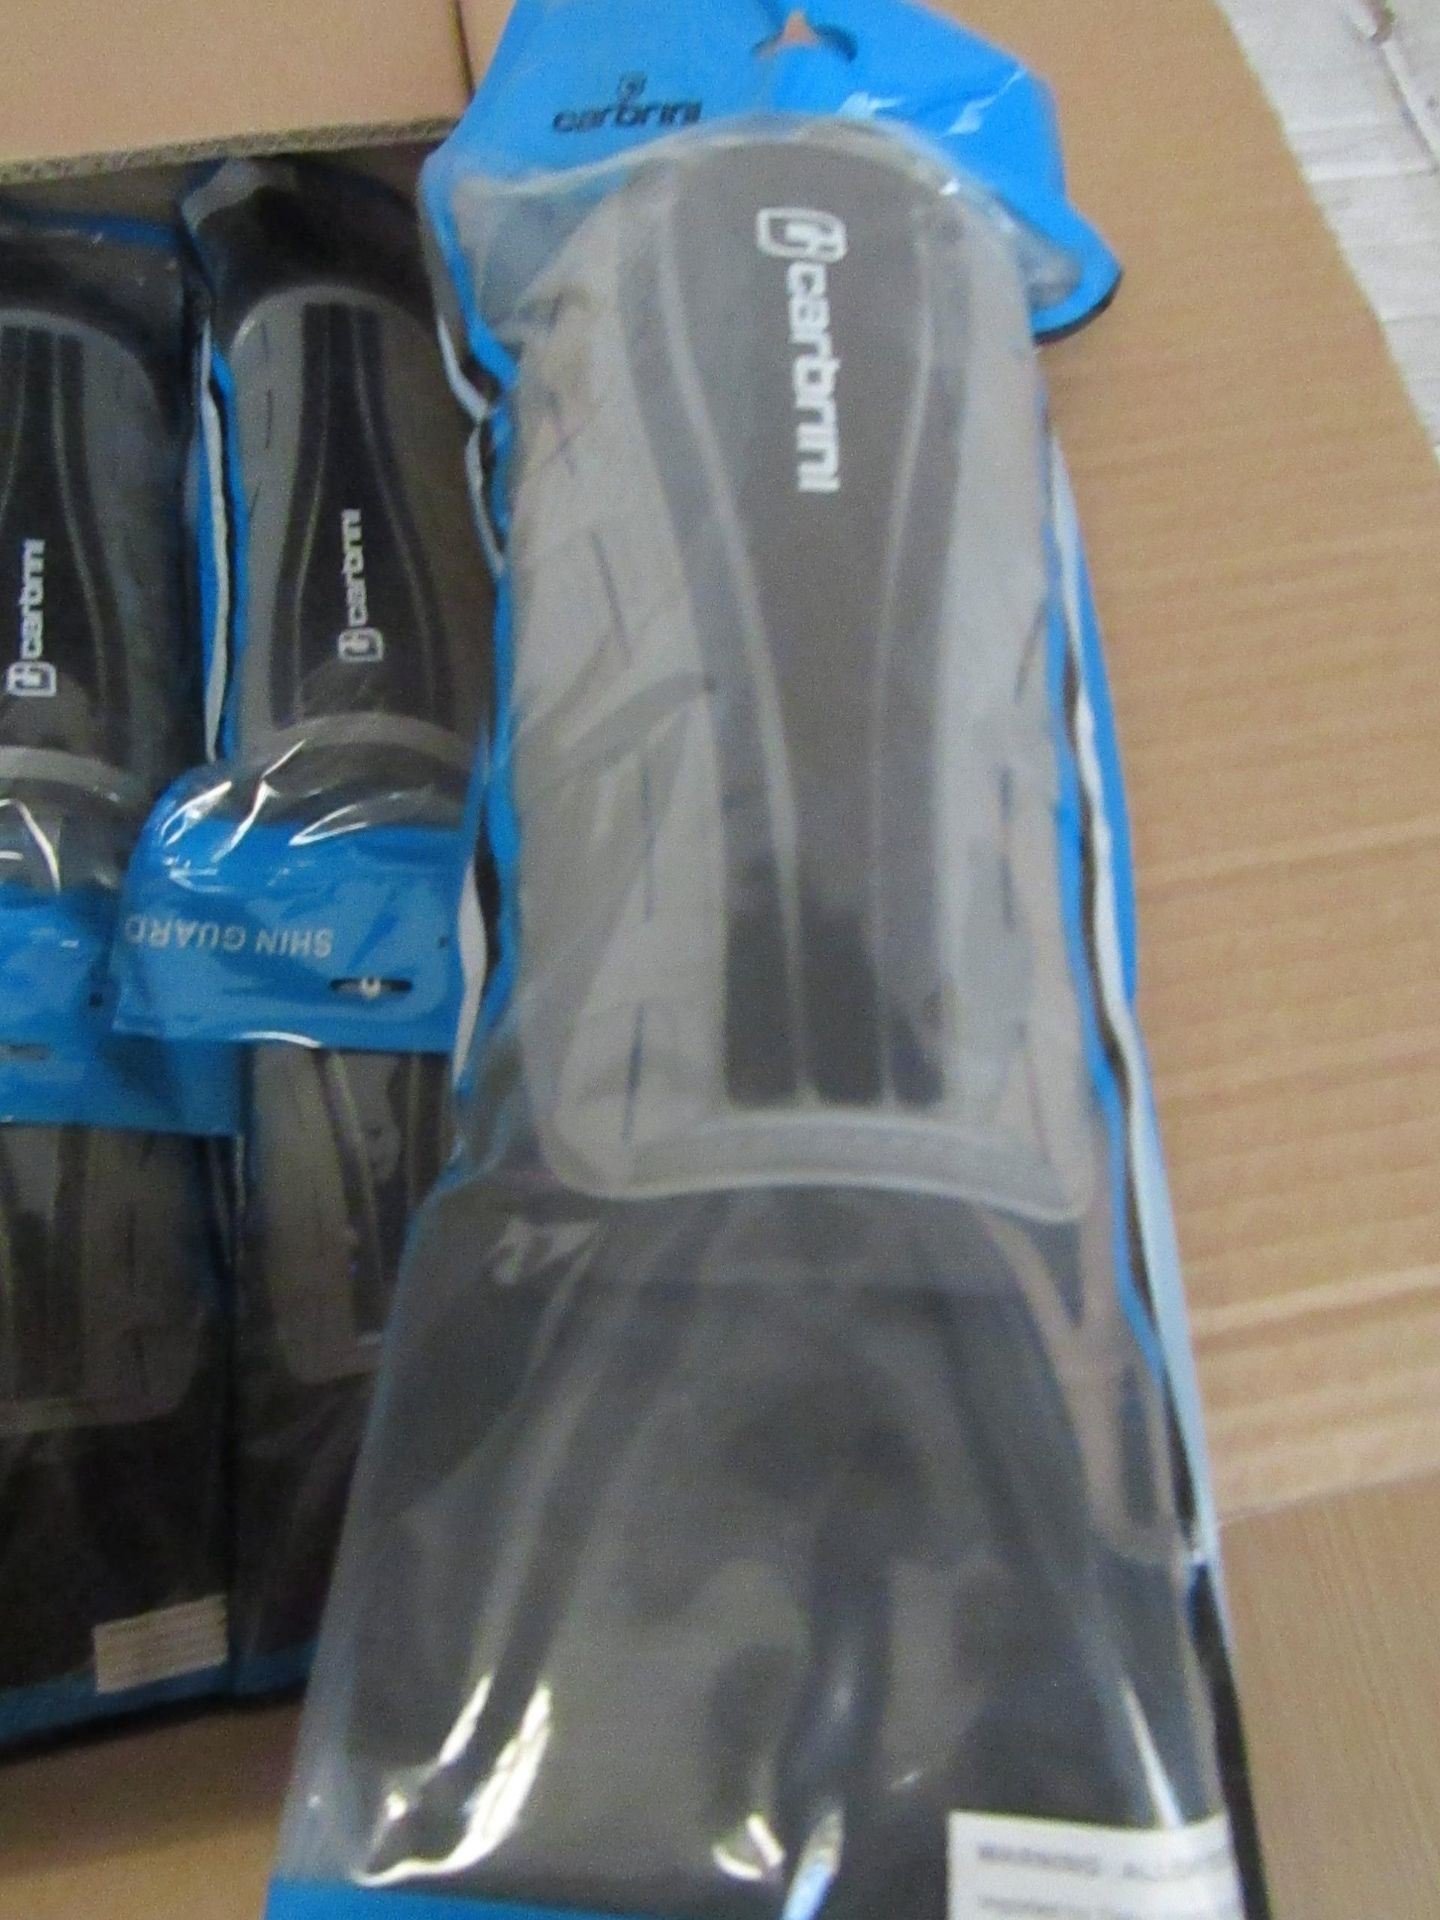 3x Carbrini - Adult Shin Guards - New & Packaged.